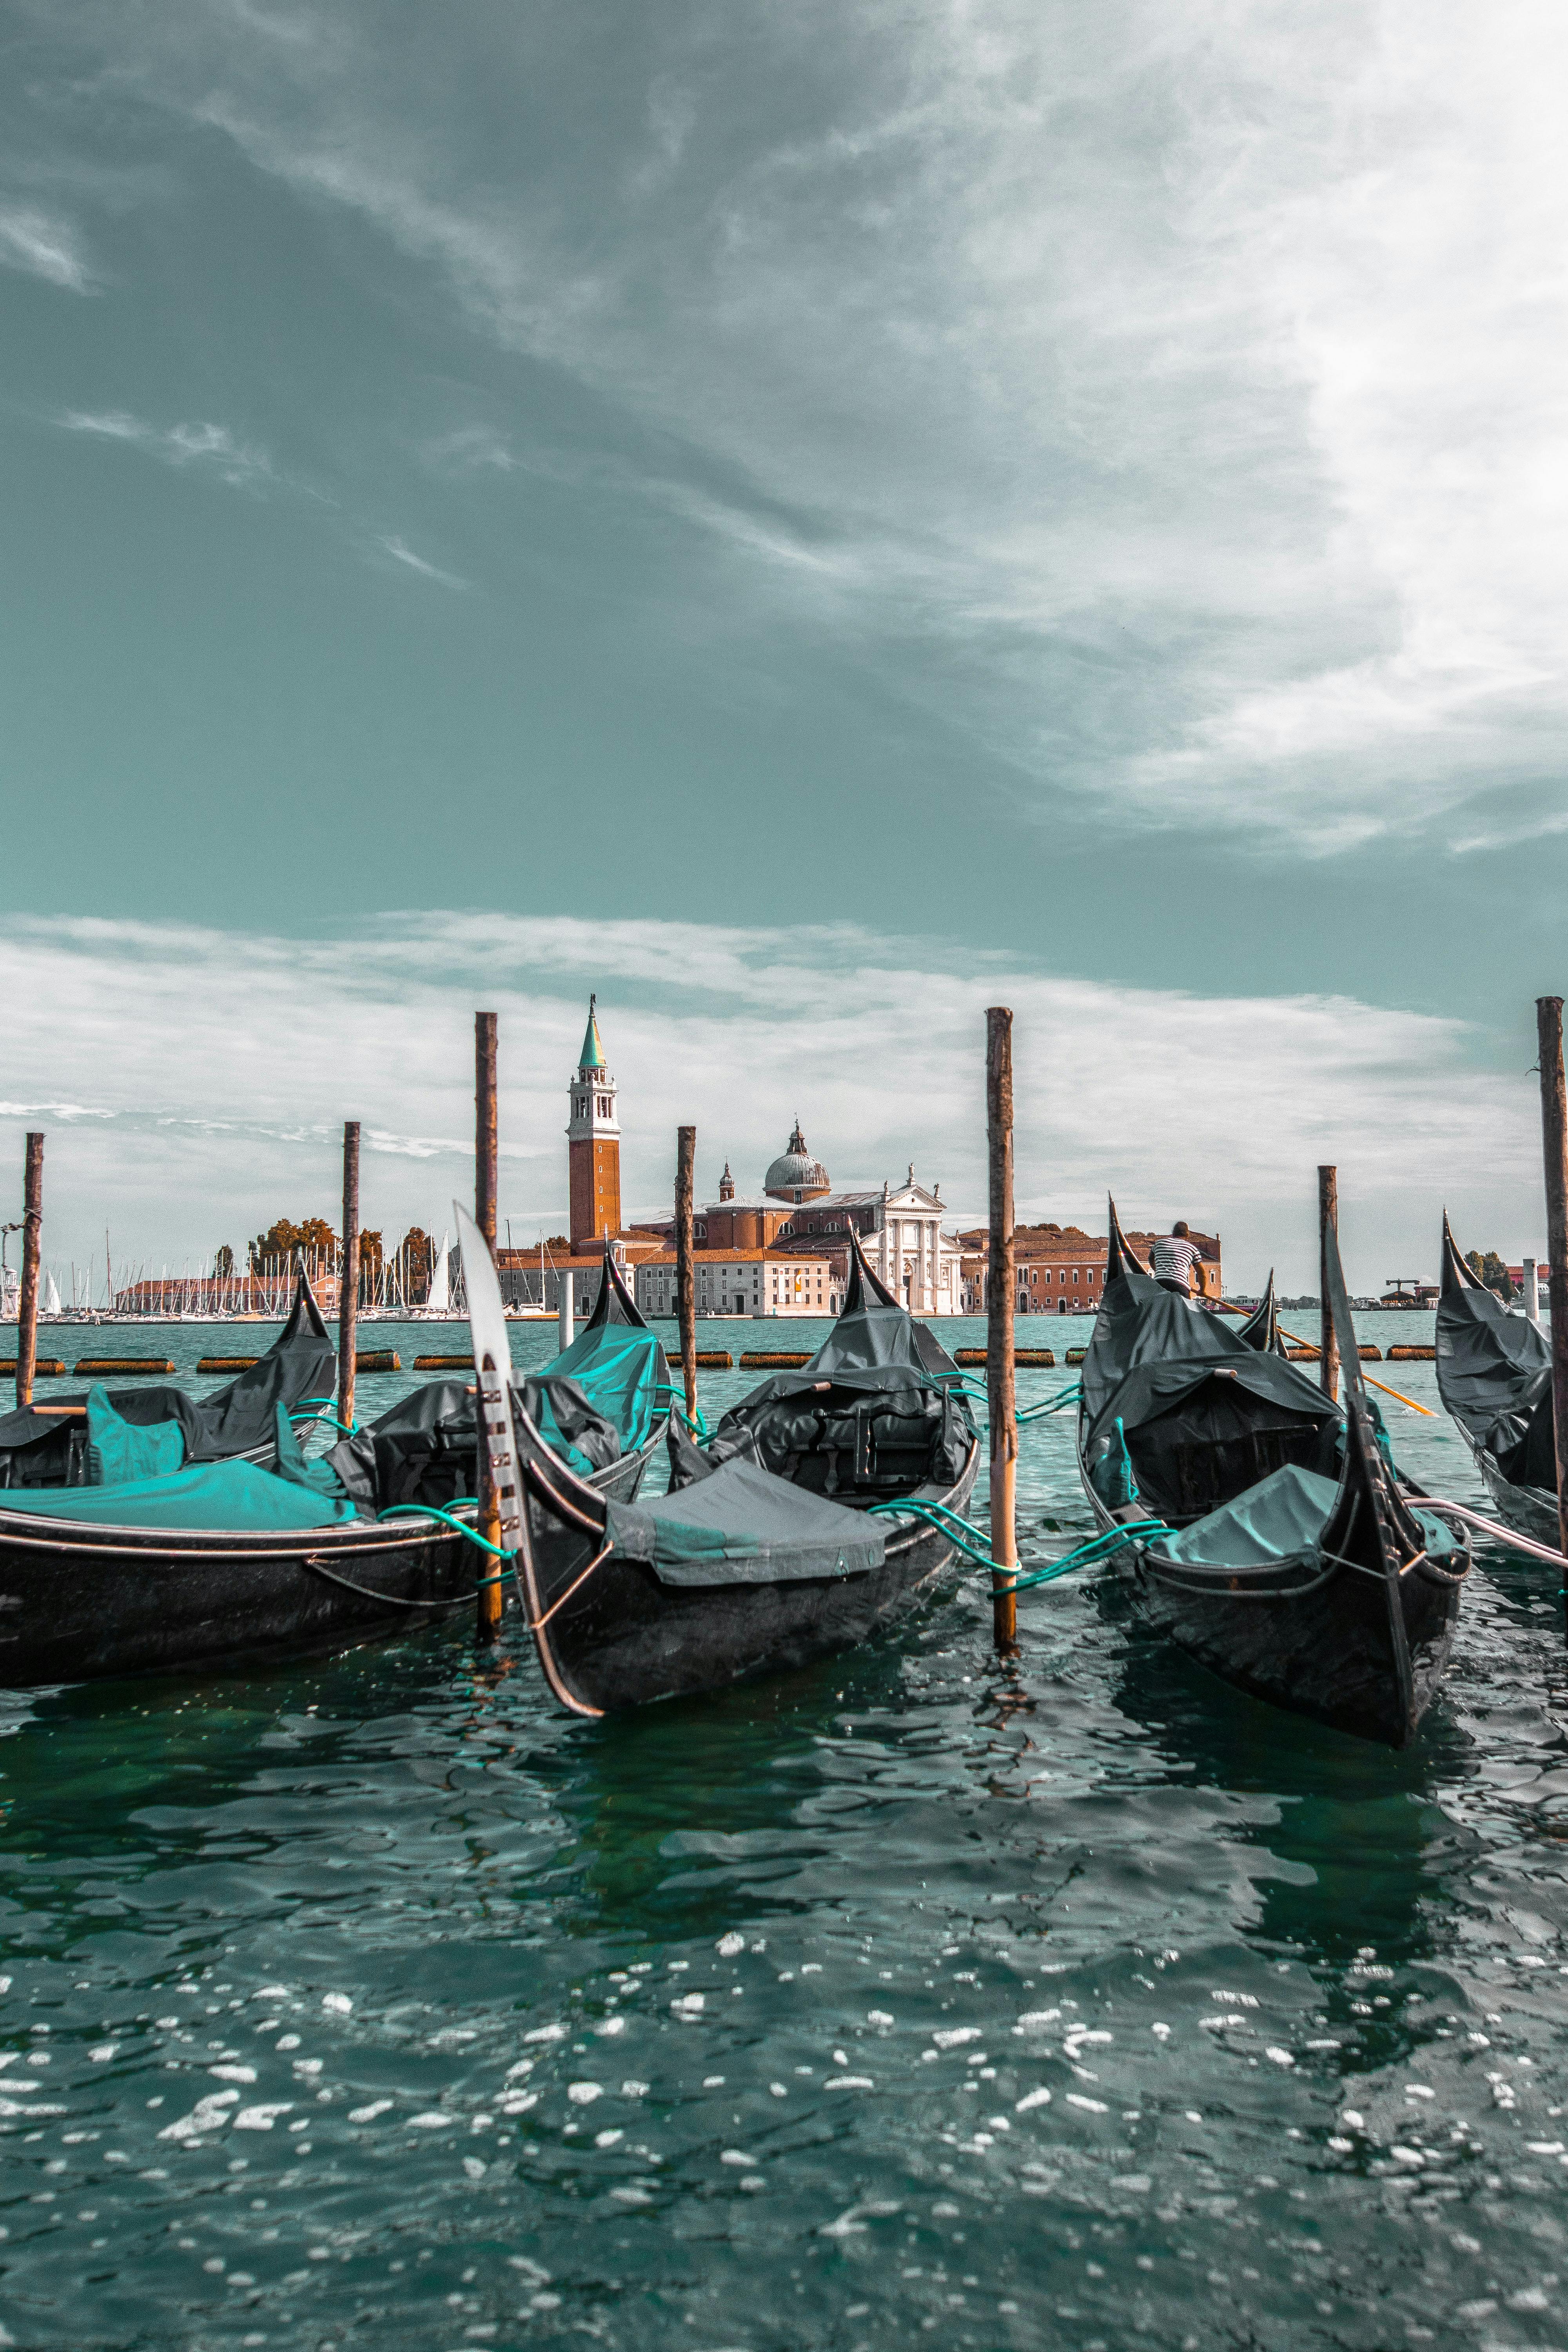 Visiting Venice on a budget